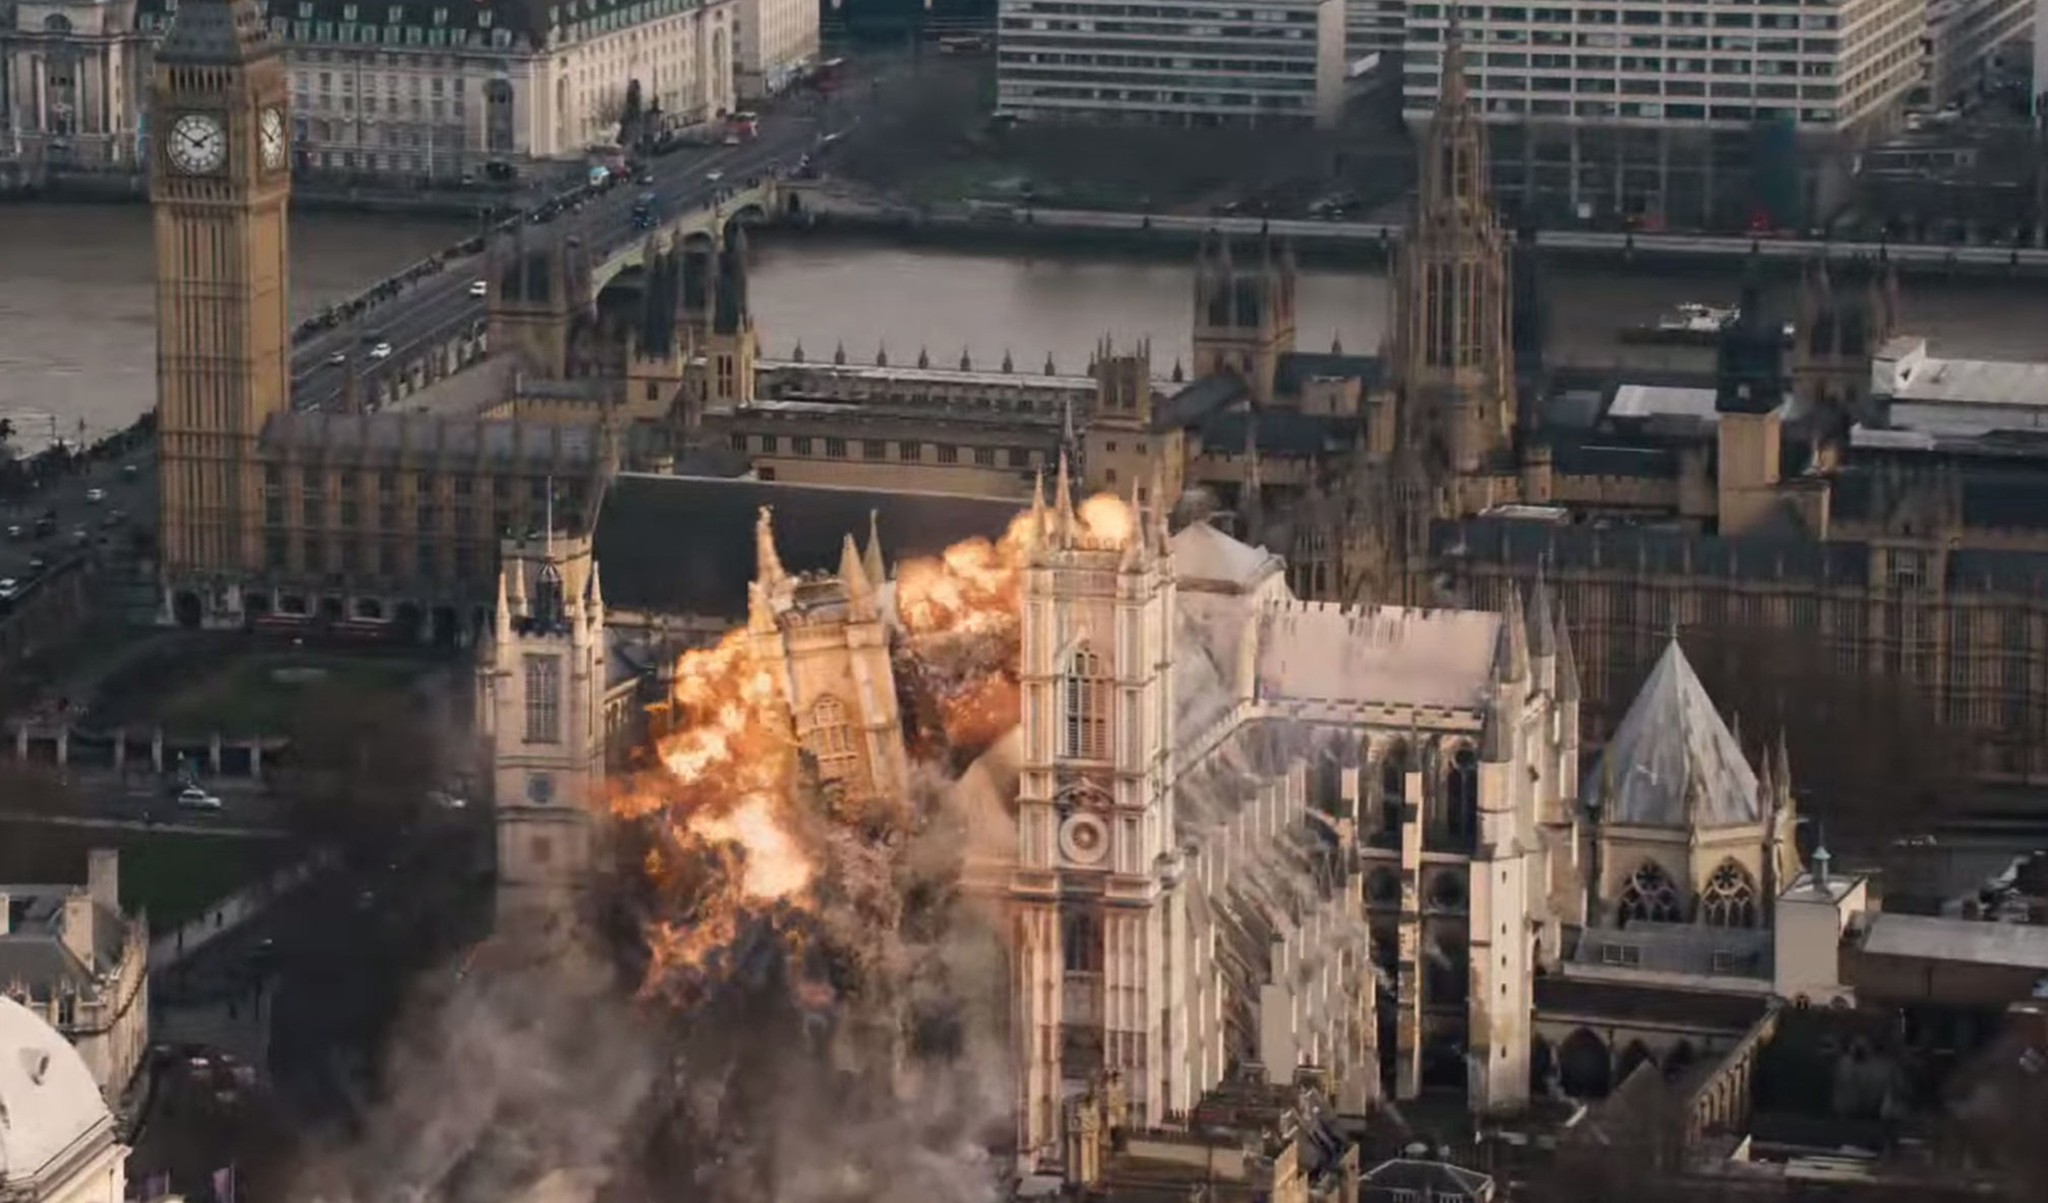 Cool, blow up some landmarks like Westminster Abbey. Shocking!